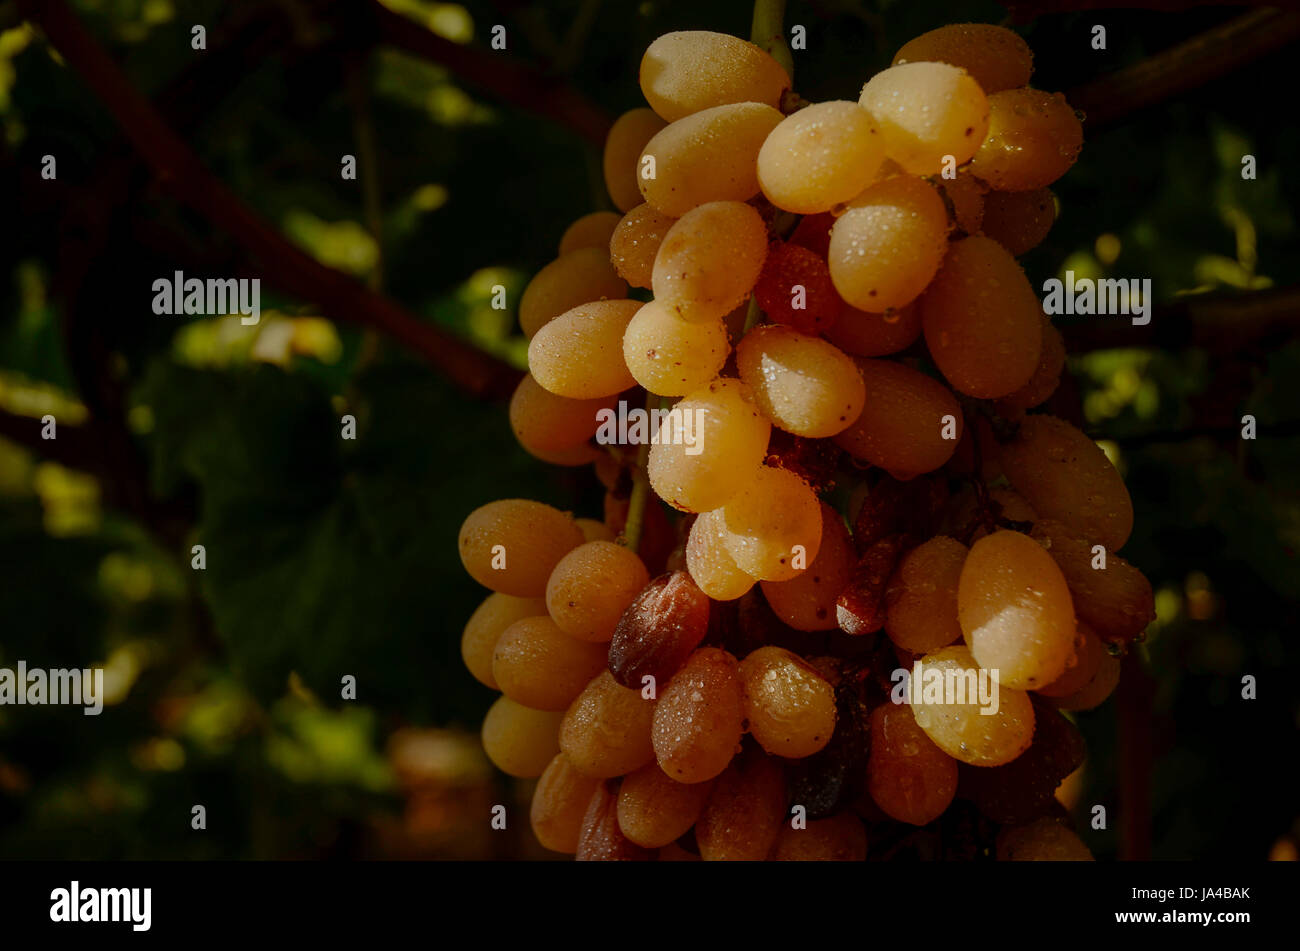 Close up of a cluster of ripe grapes on a grapevine in a vineyard Photographed in the Lachish Region, Negev, Israel Stock Photo